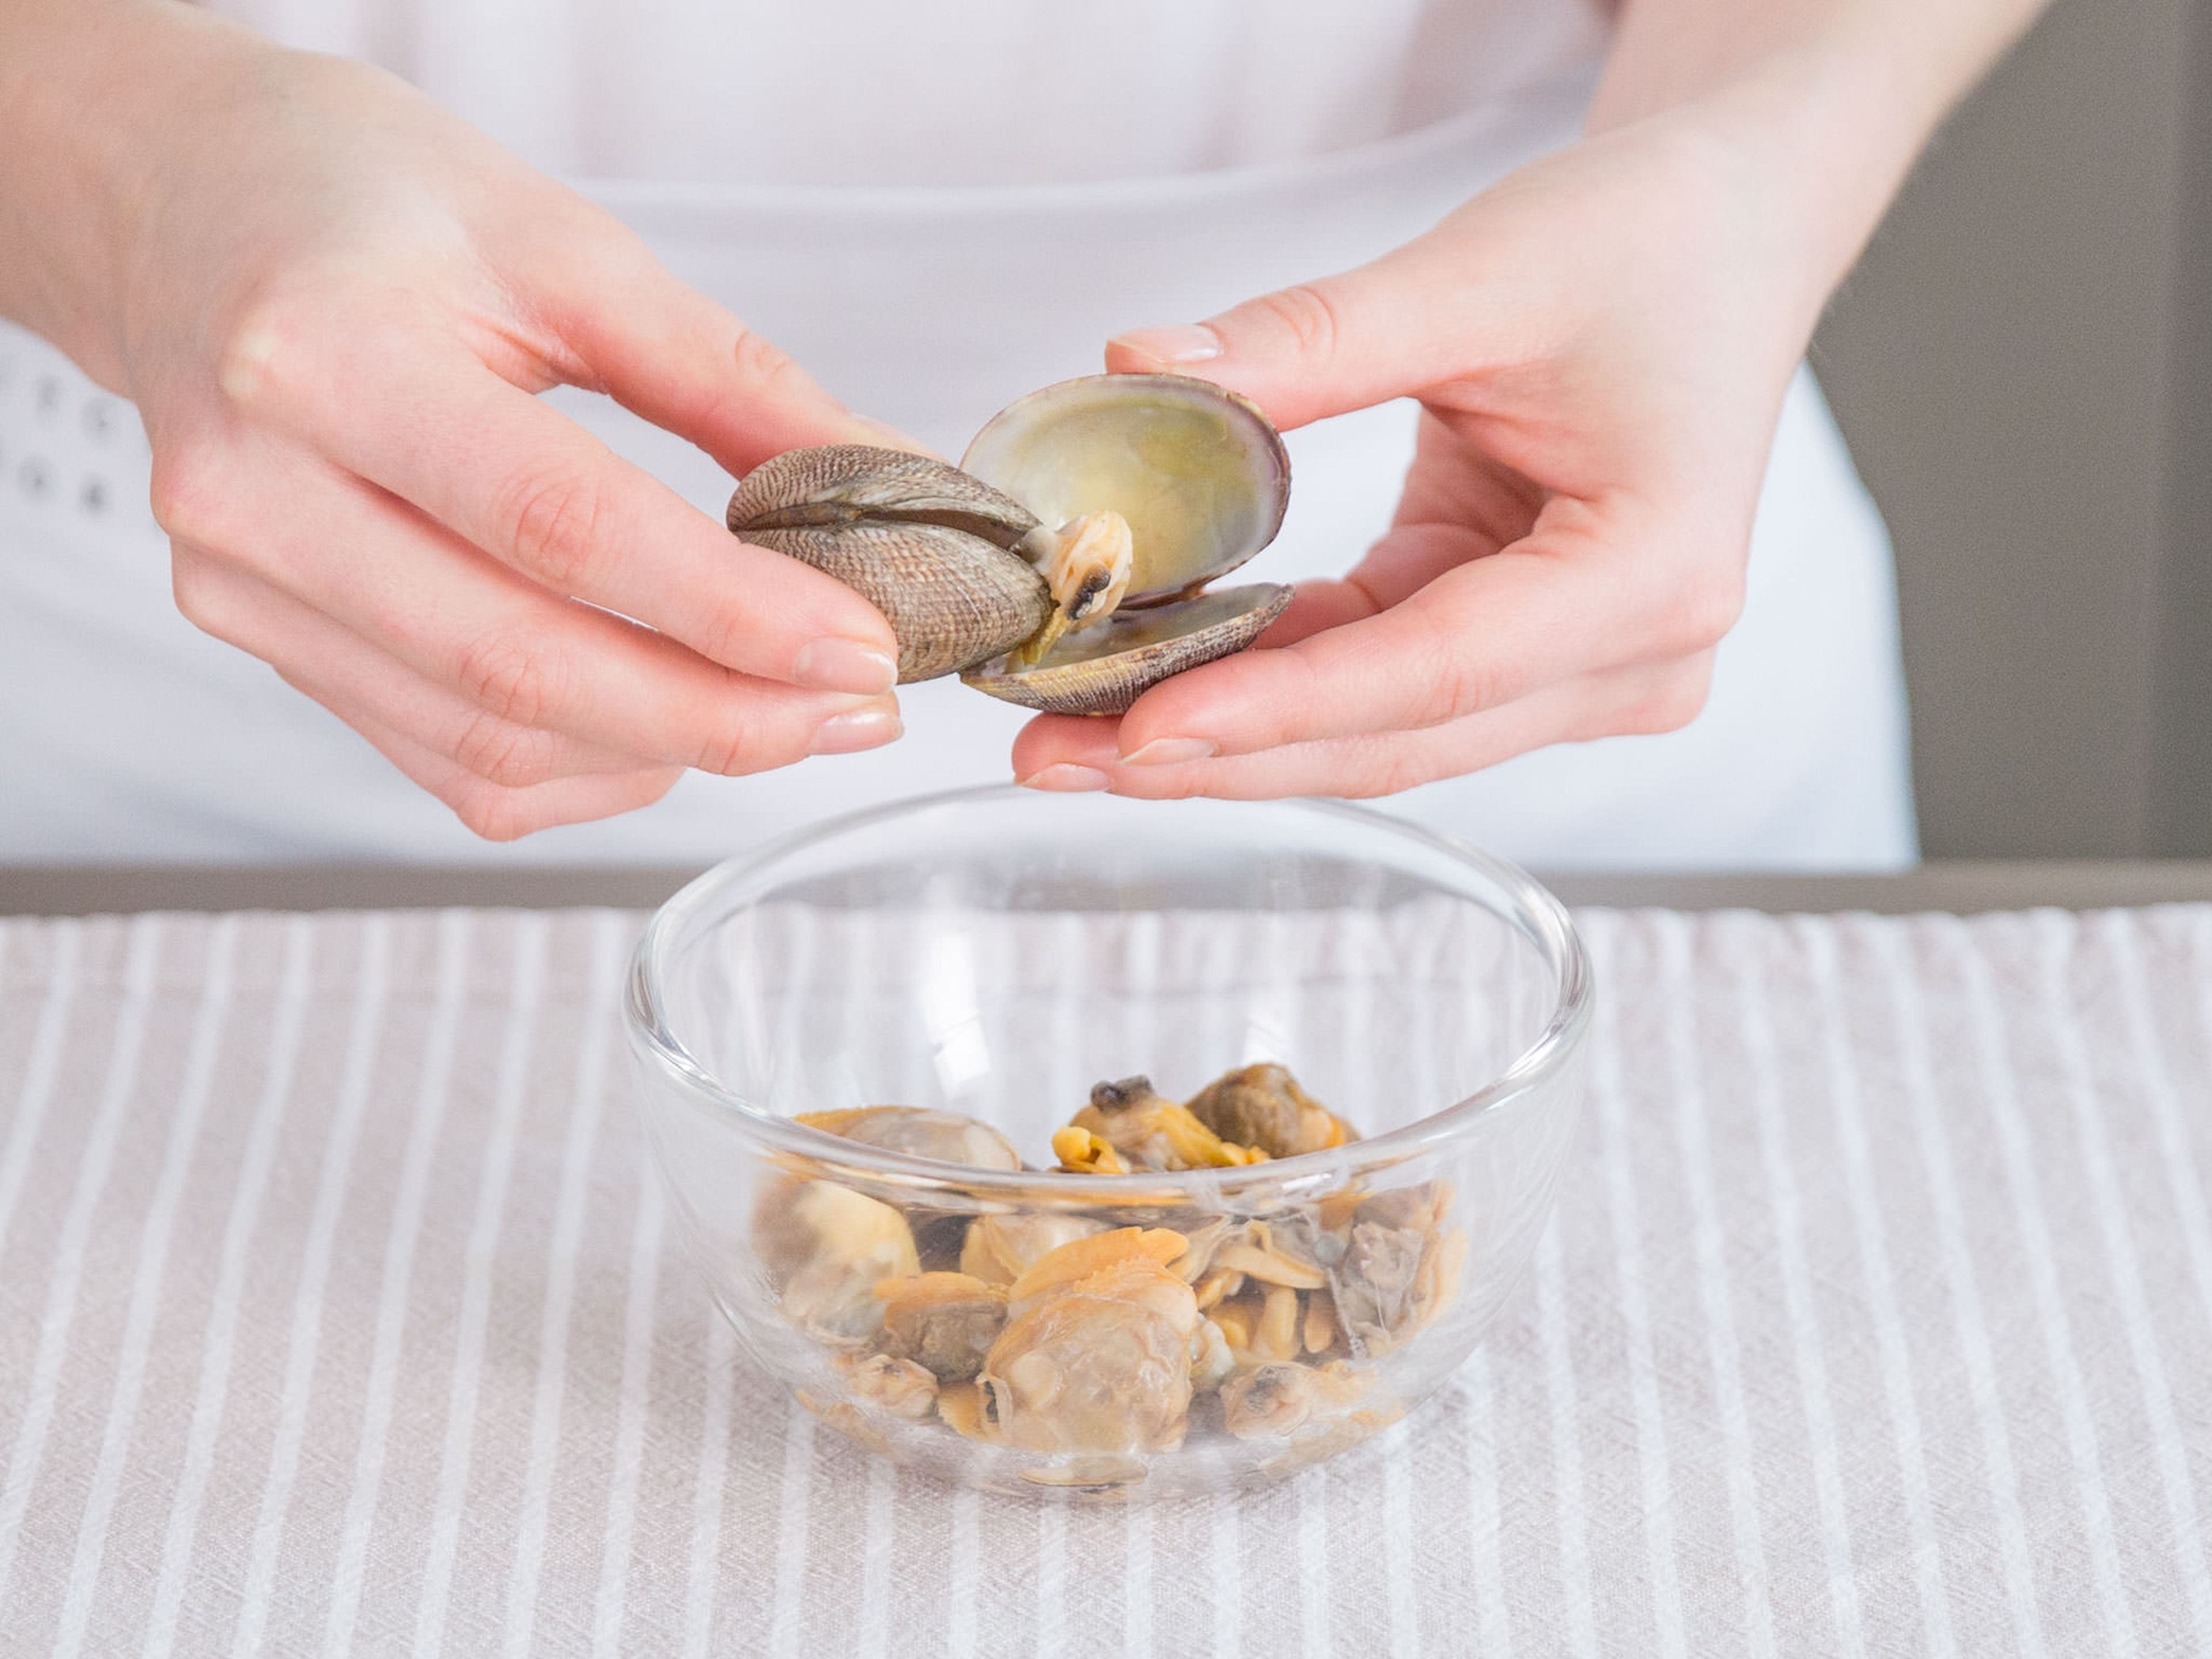 In a large saucepan, heat fish broth on medium heat. Add clams and cook on low heat for approx. 1 – 2 min. Remove from broth with a slotted spoon, reserve fish stock, and separate clams from shell. Set aside.